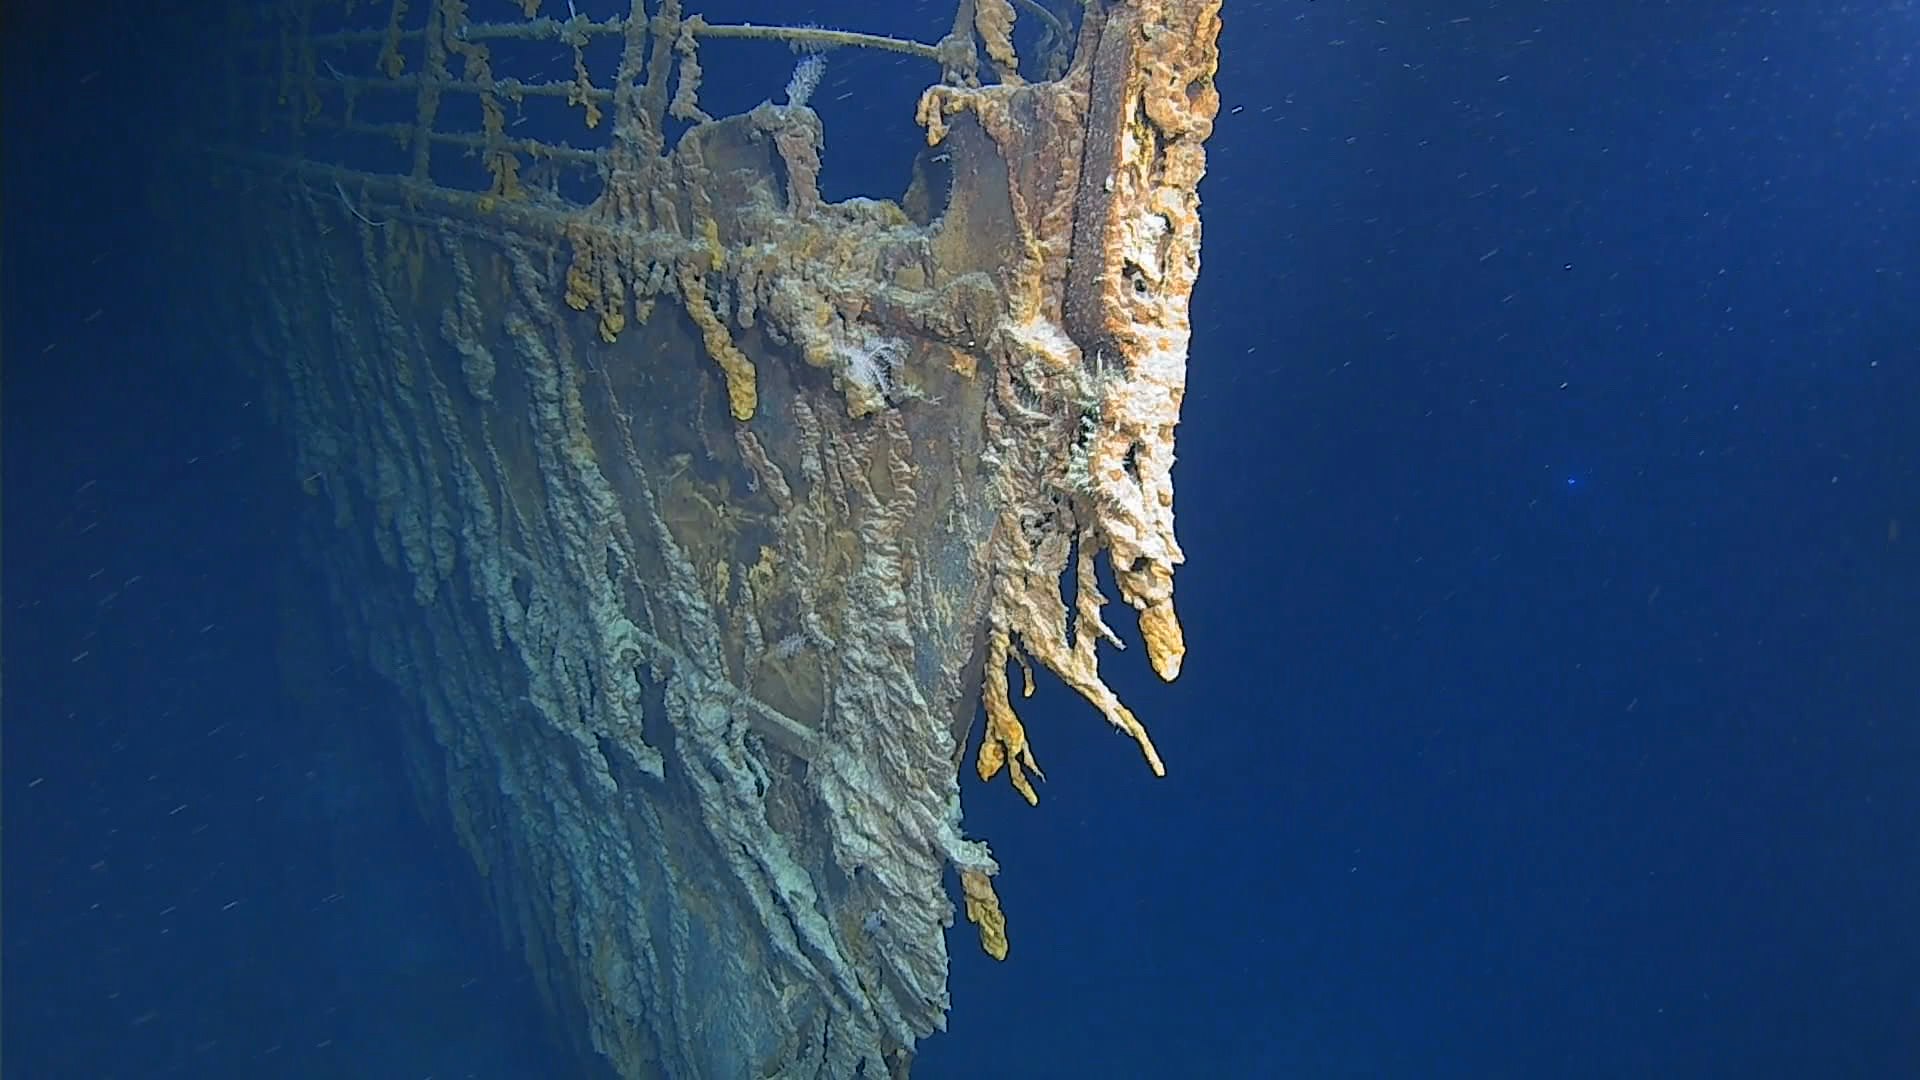 The wreck of the Titanic underwater